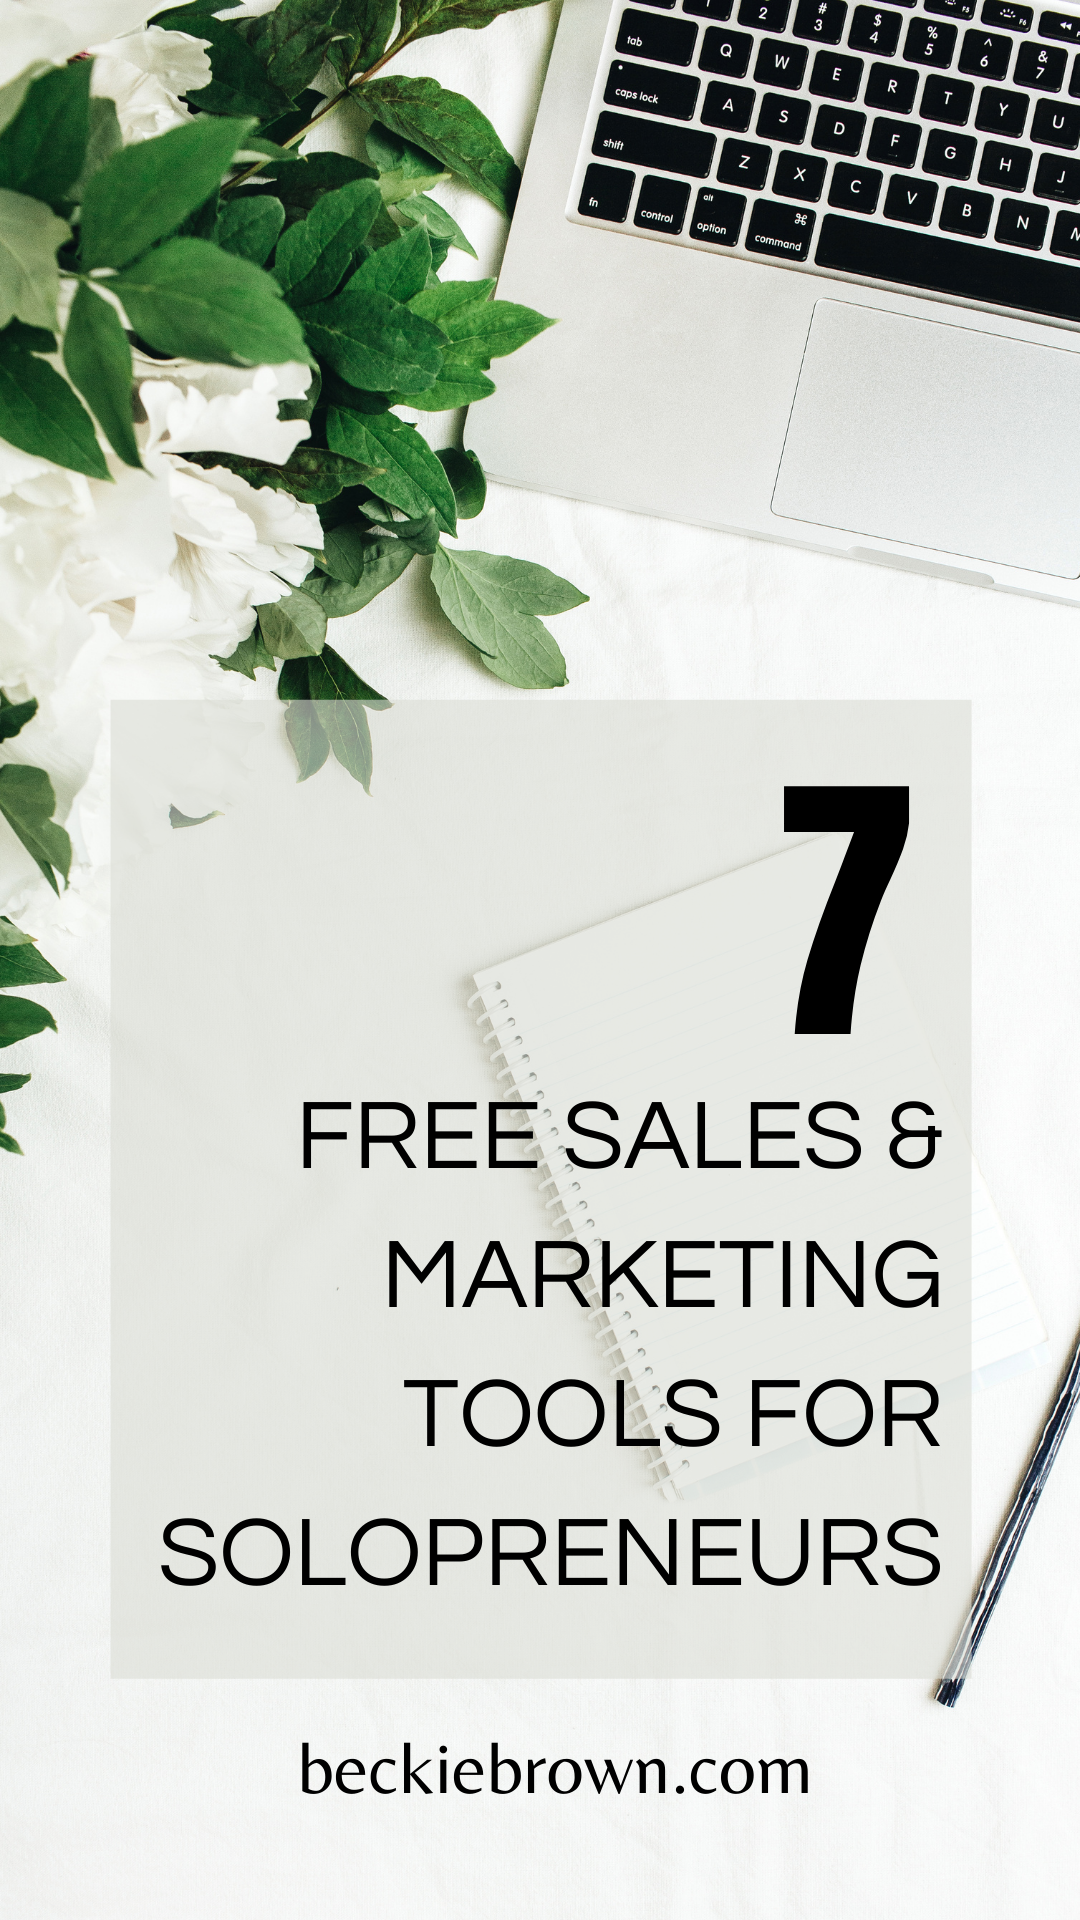 Pin Image: Free Sales & Marketing Tools For Solopreneurs